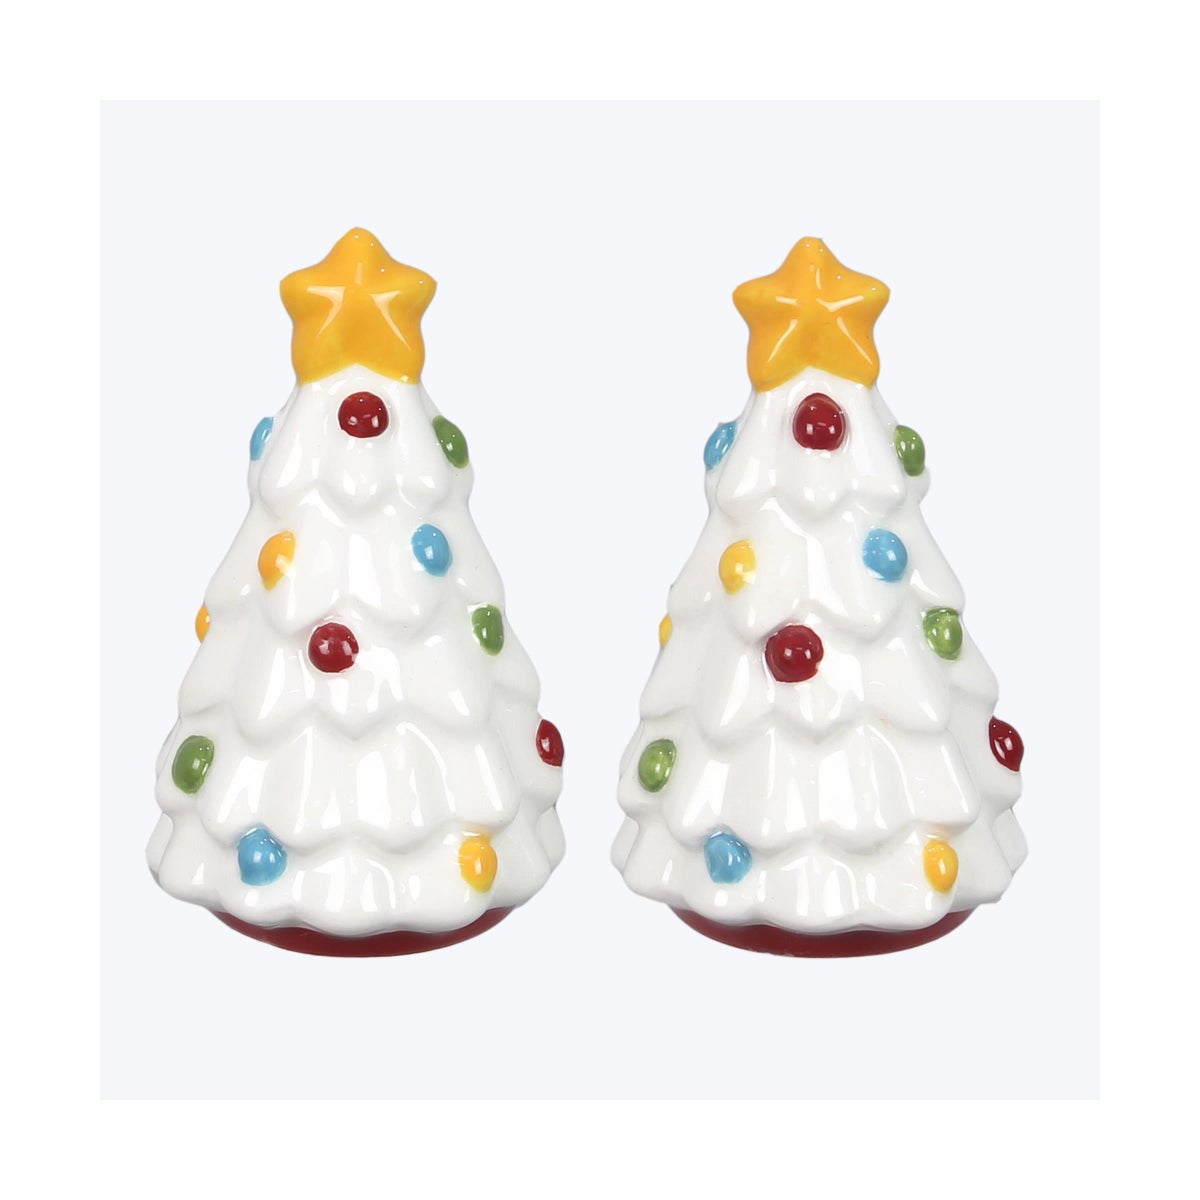 Ceramic Colorful Christmas Tree Shaped Salt and Pepper Set. S/P